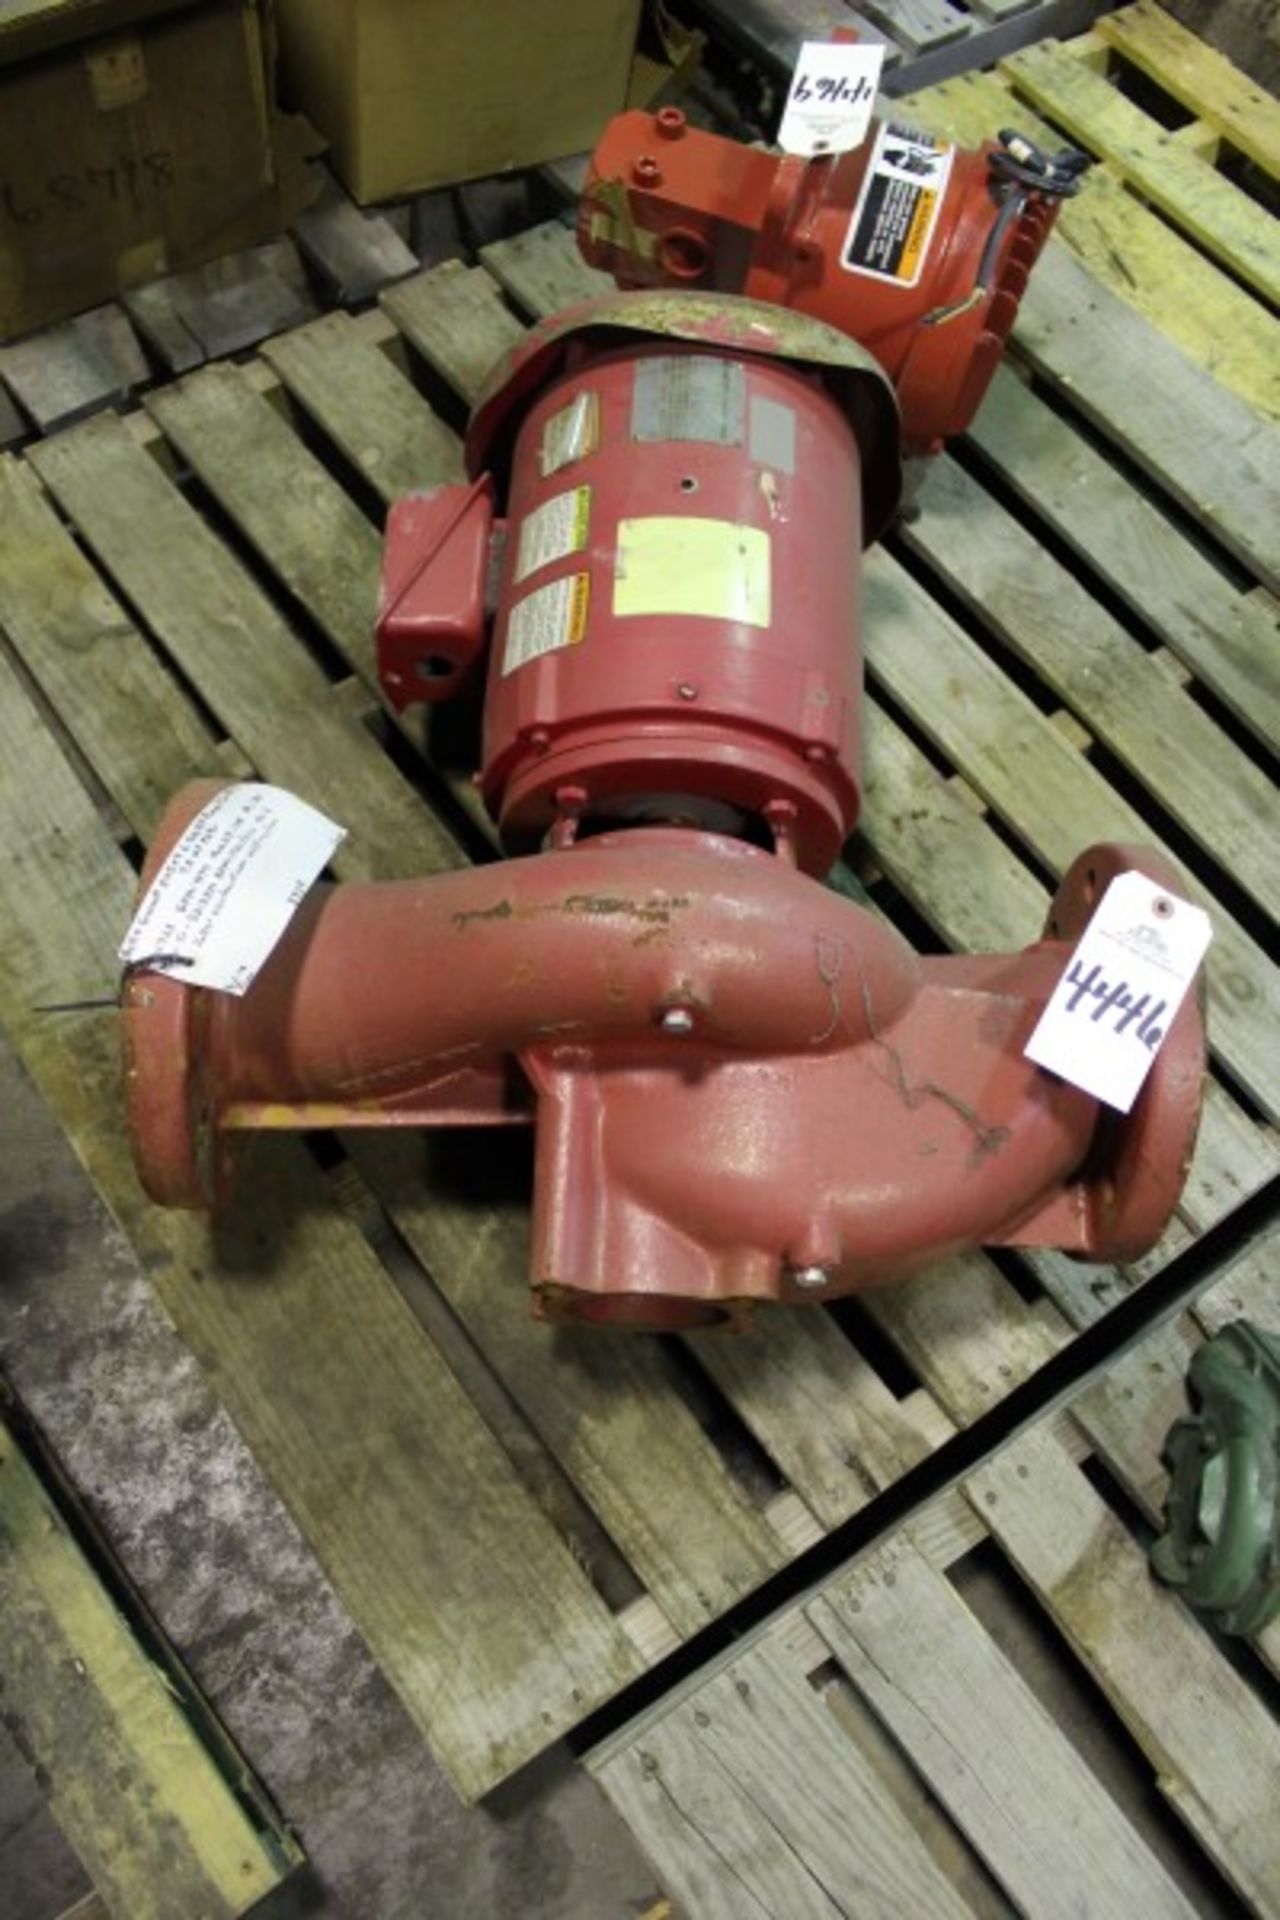 Bell & Gossett 5 x 5 x 7 BF Pump, 7.5 HP | Seller to load for $10 per lot or buyers may remove